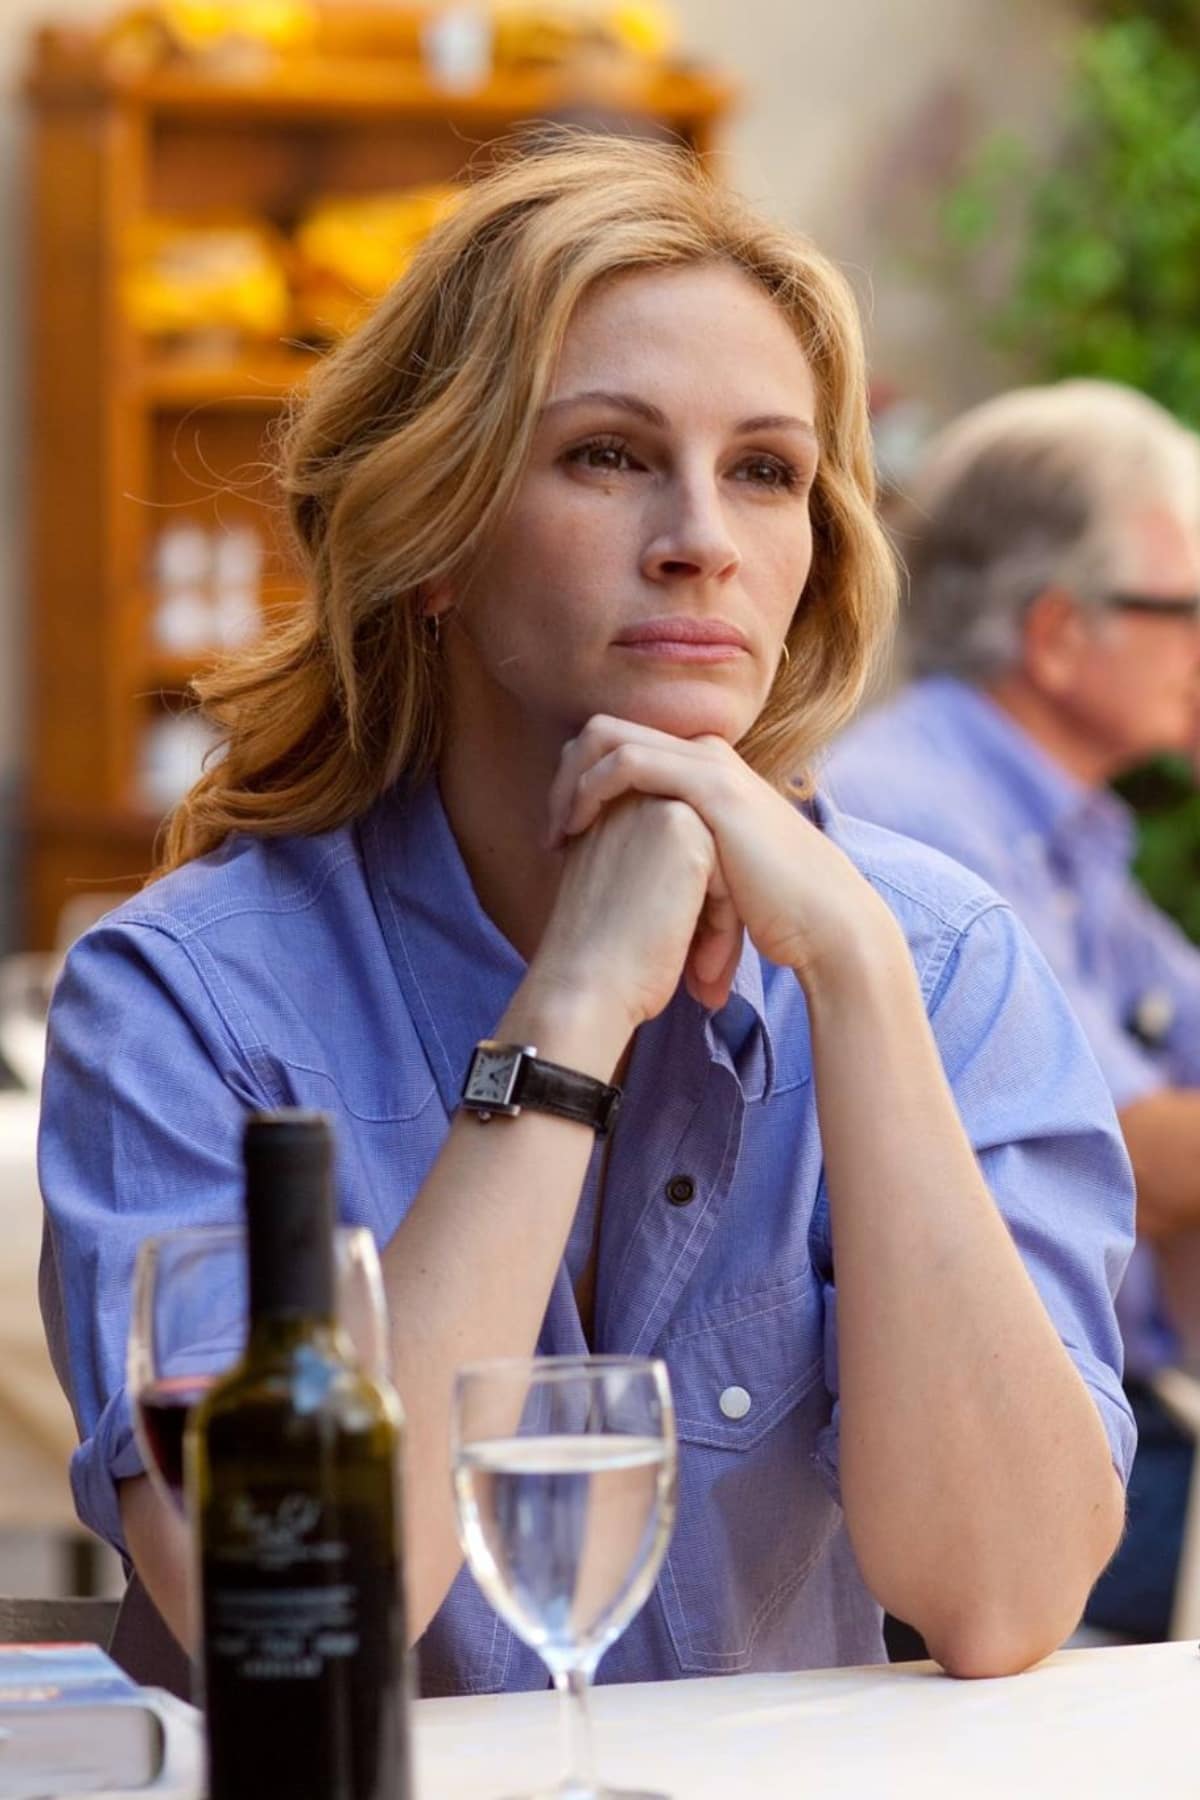 Julia Roberts in a Movie Called Eat Pray Love